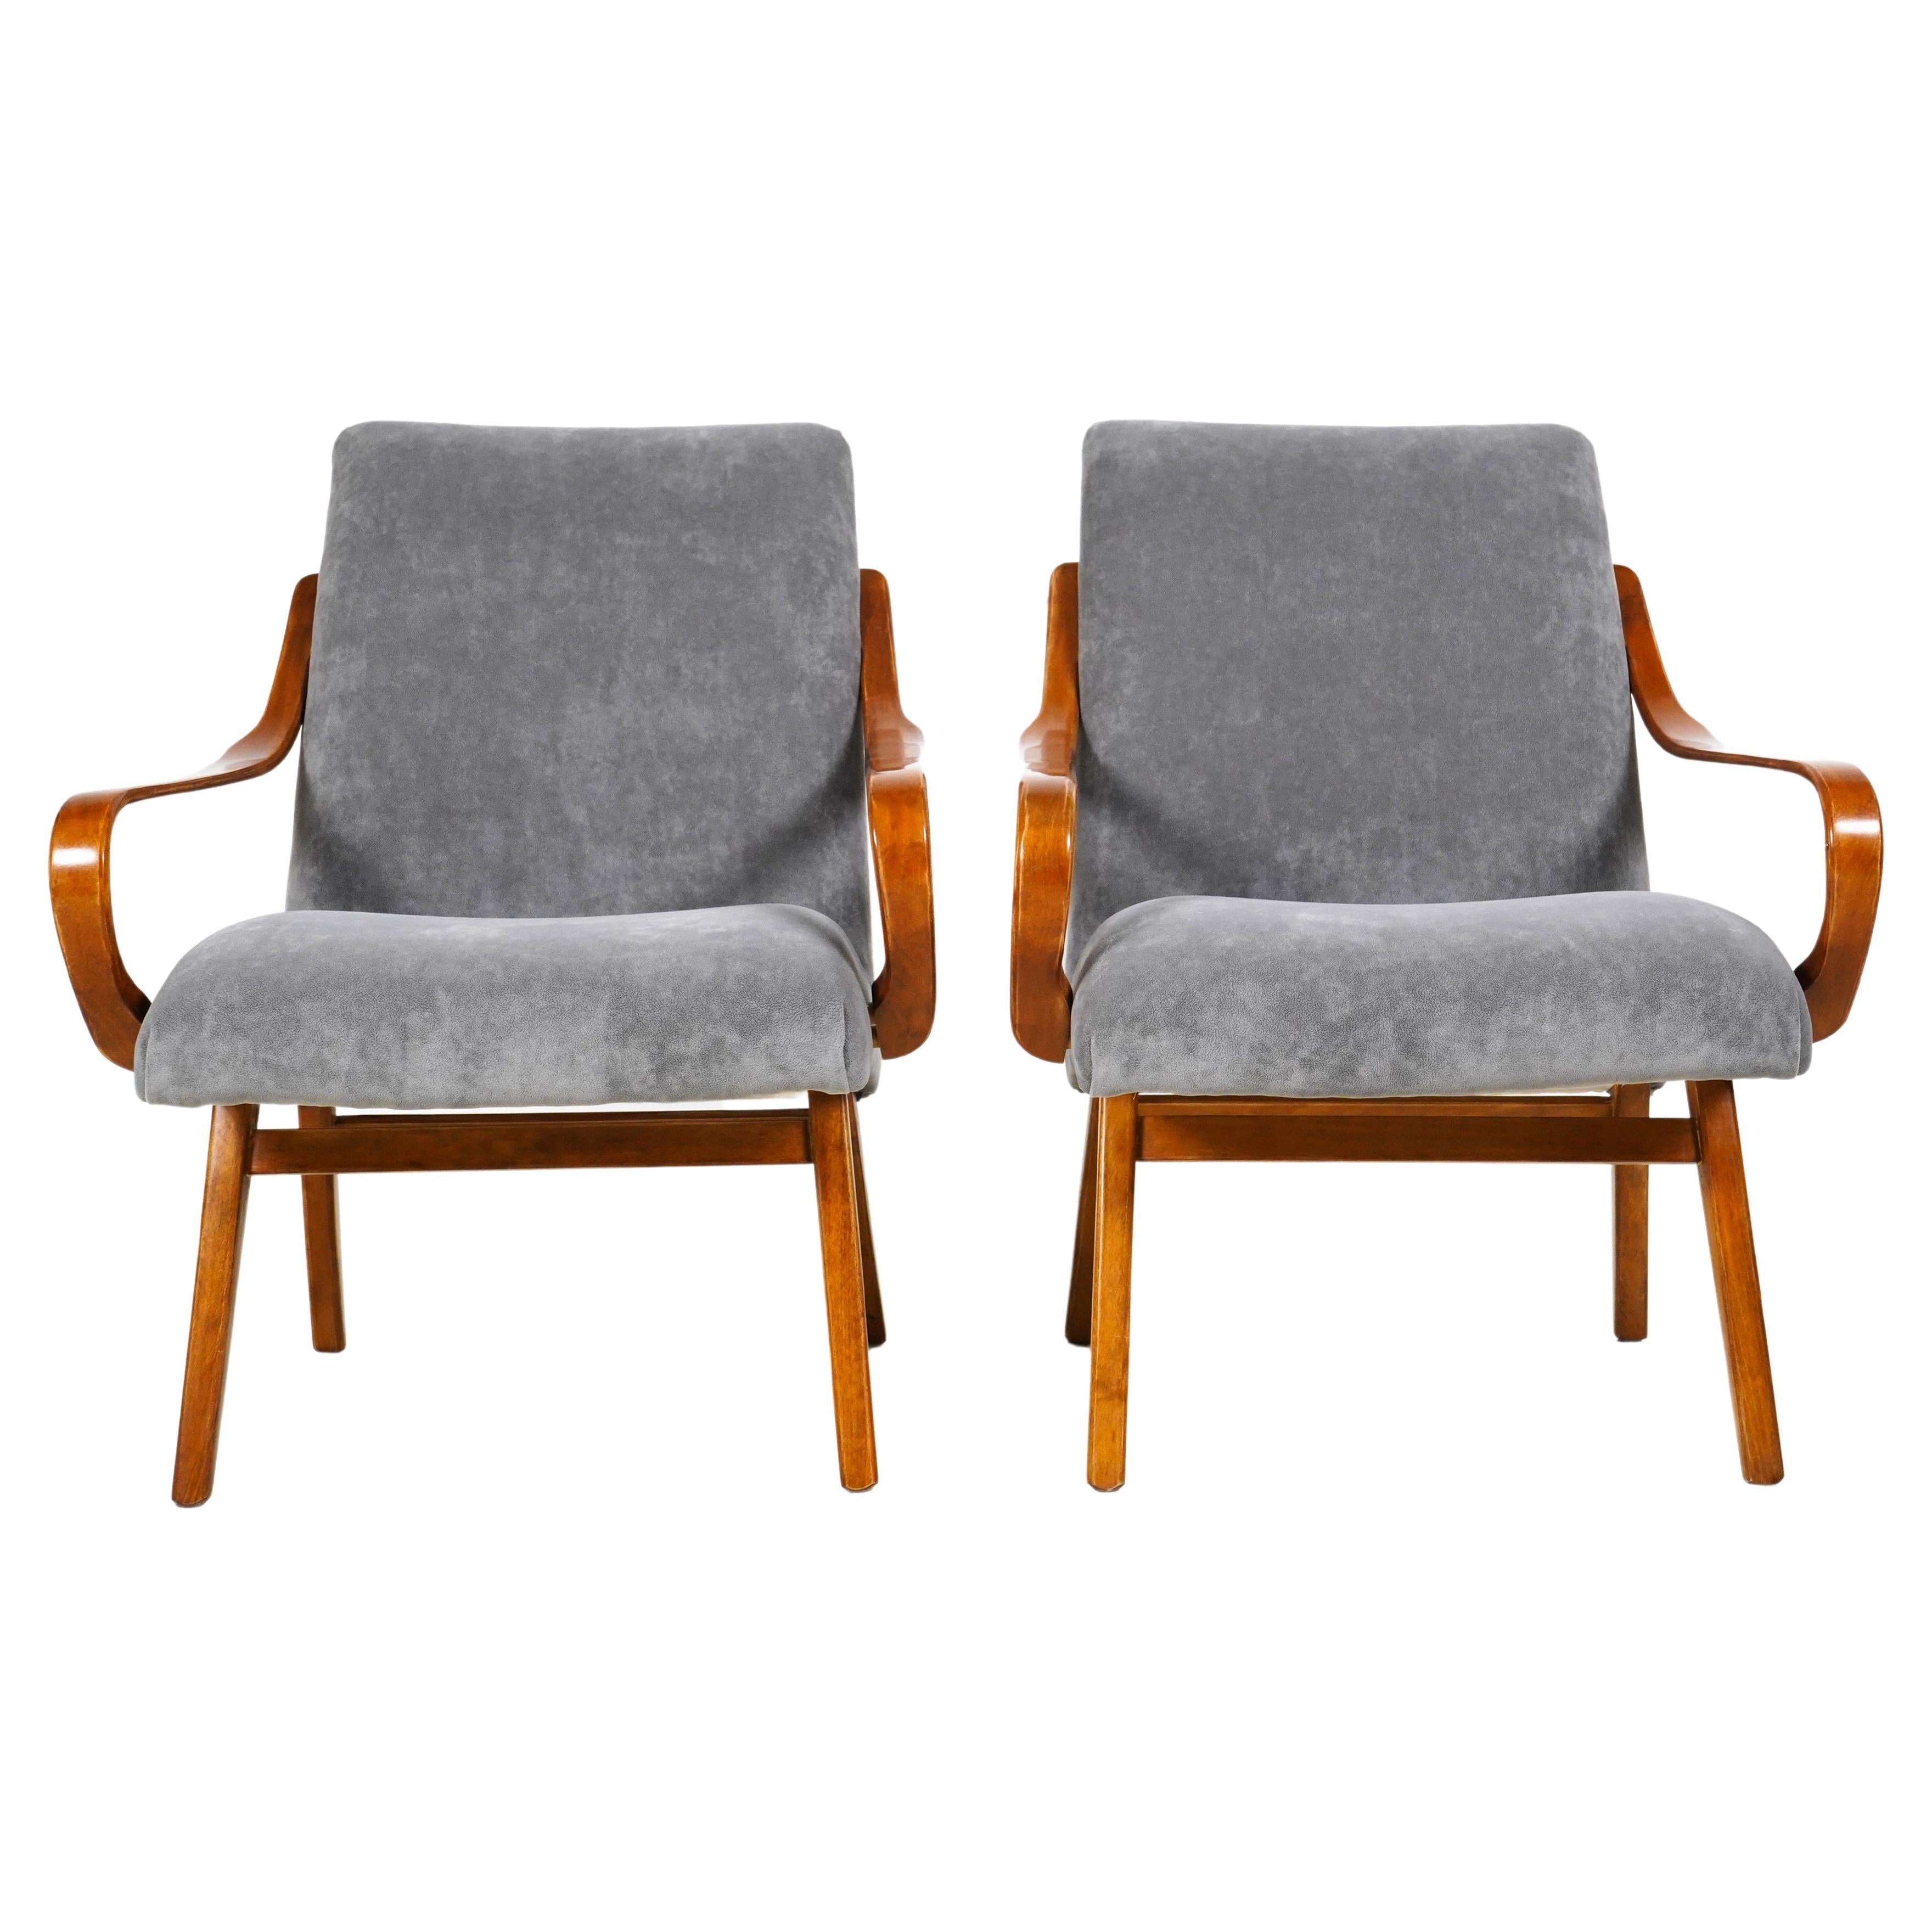 Pair of Midcentury Armchairs with Solid Beechwood Arms and Legs For Sale